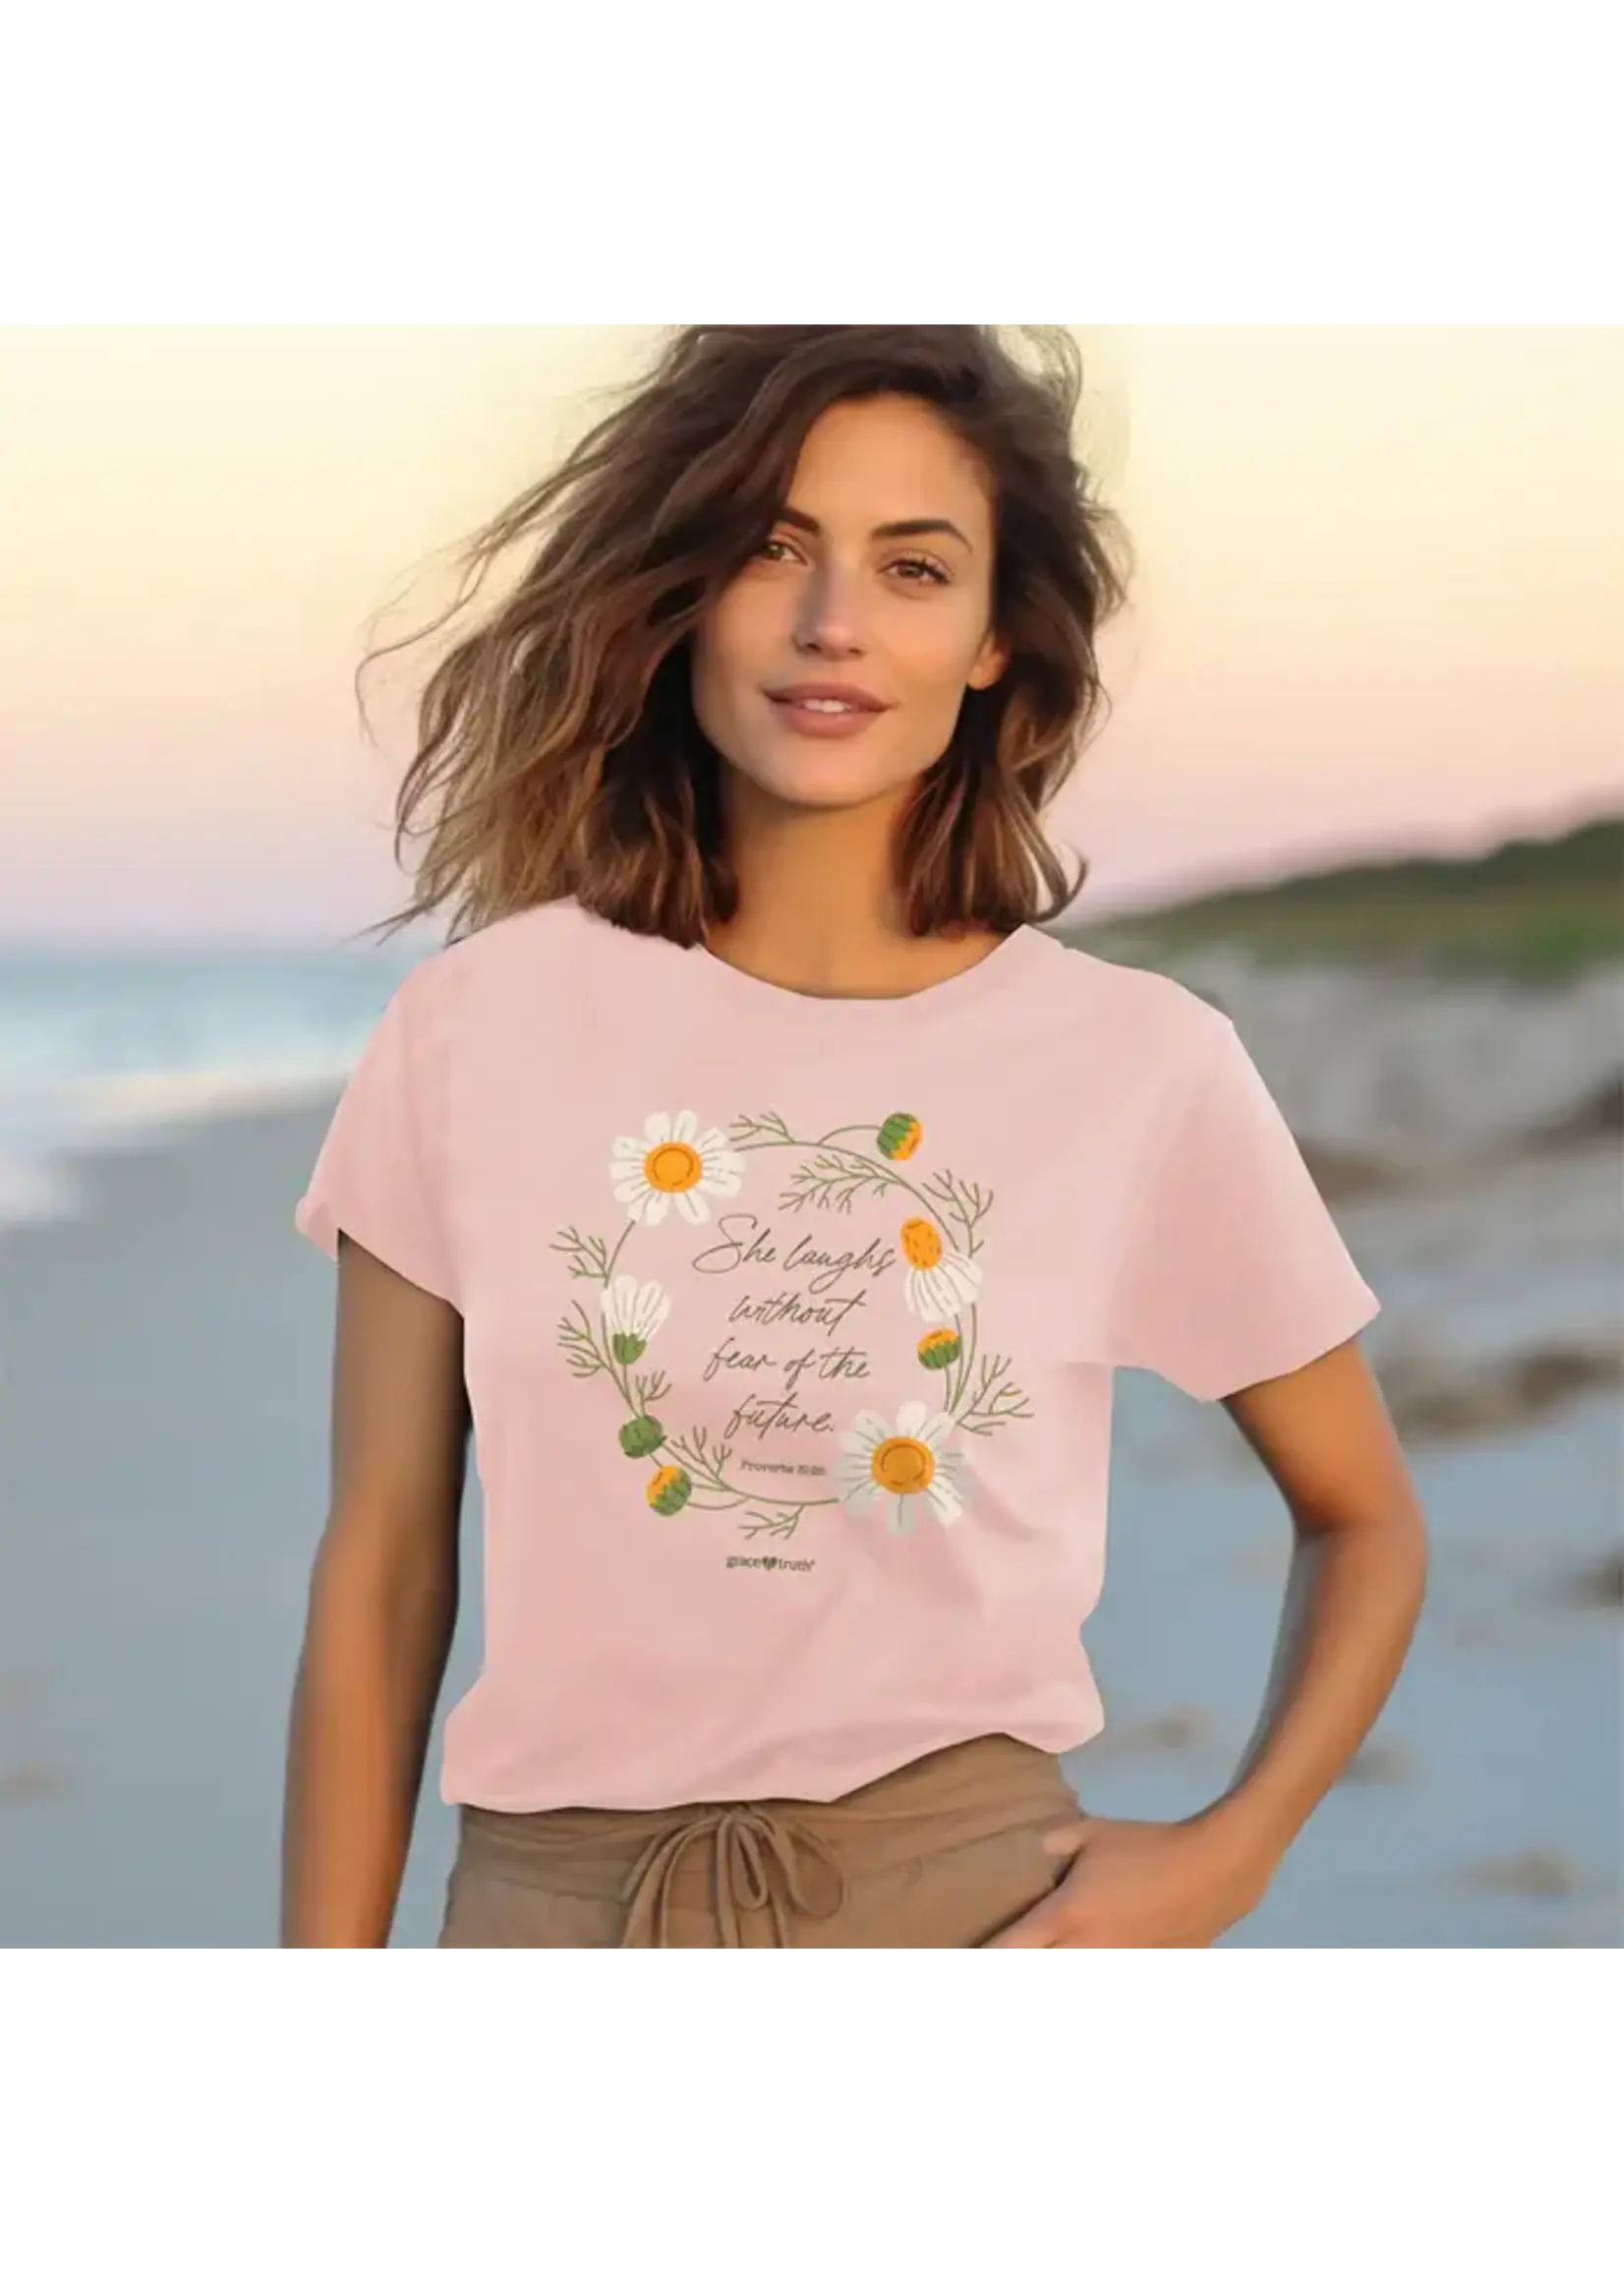 Grace & Truth "She Laughs Without Fear" Women's Tee